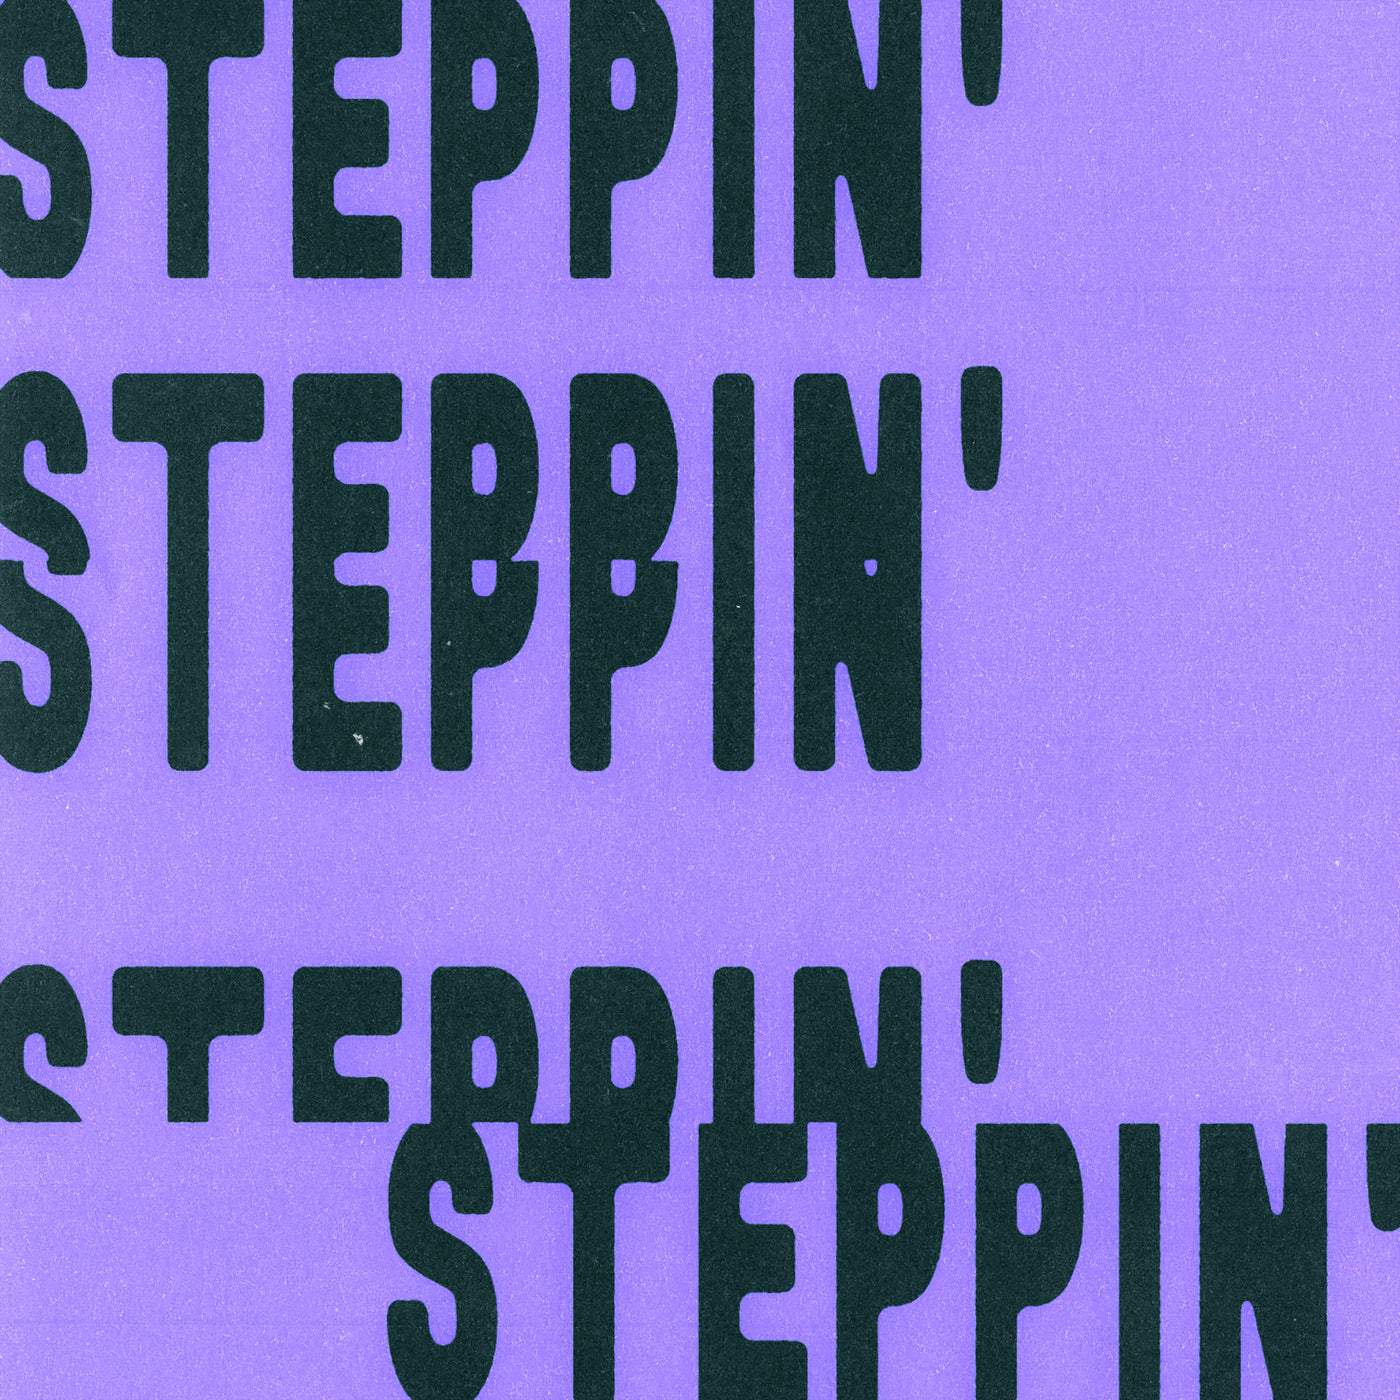 Download Ray Foxx, LO'99 - Steppin' on Electrobuzz